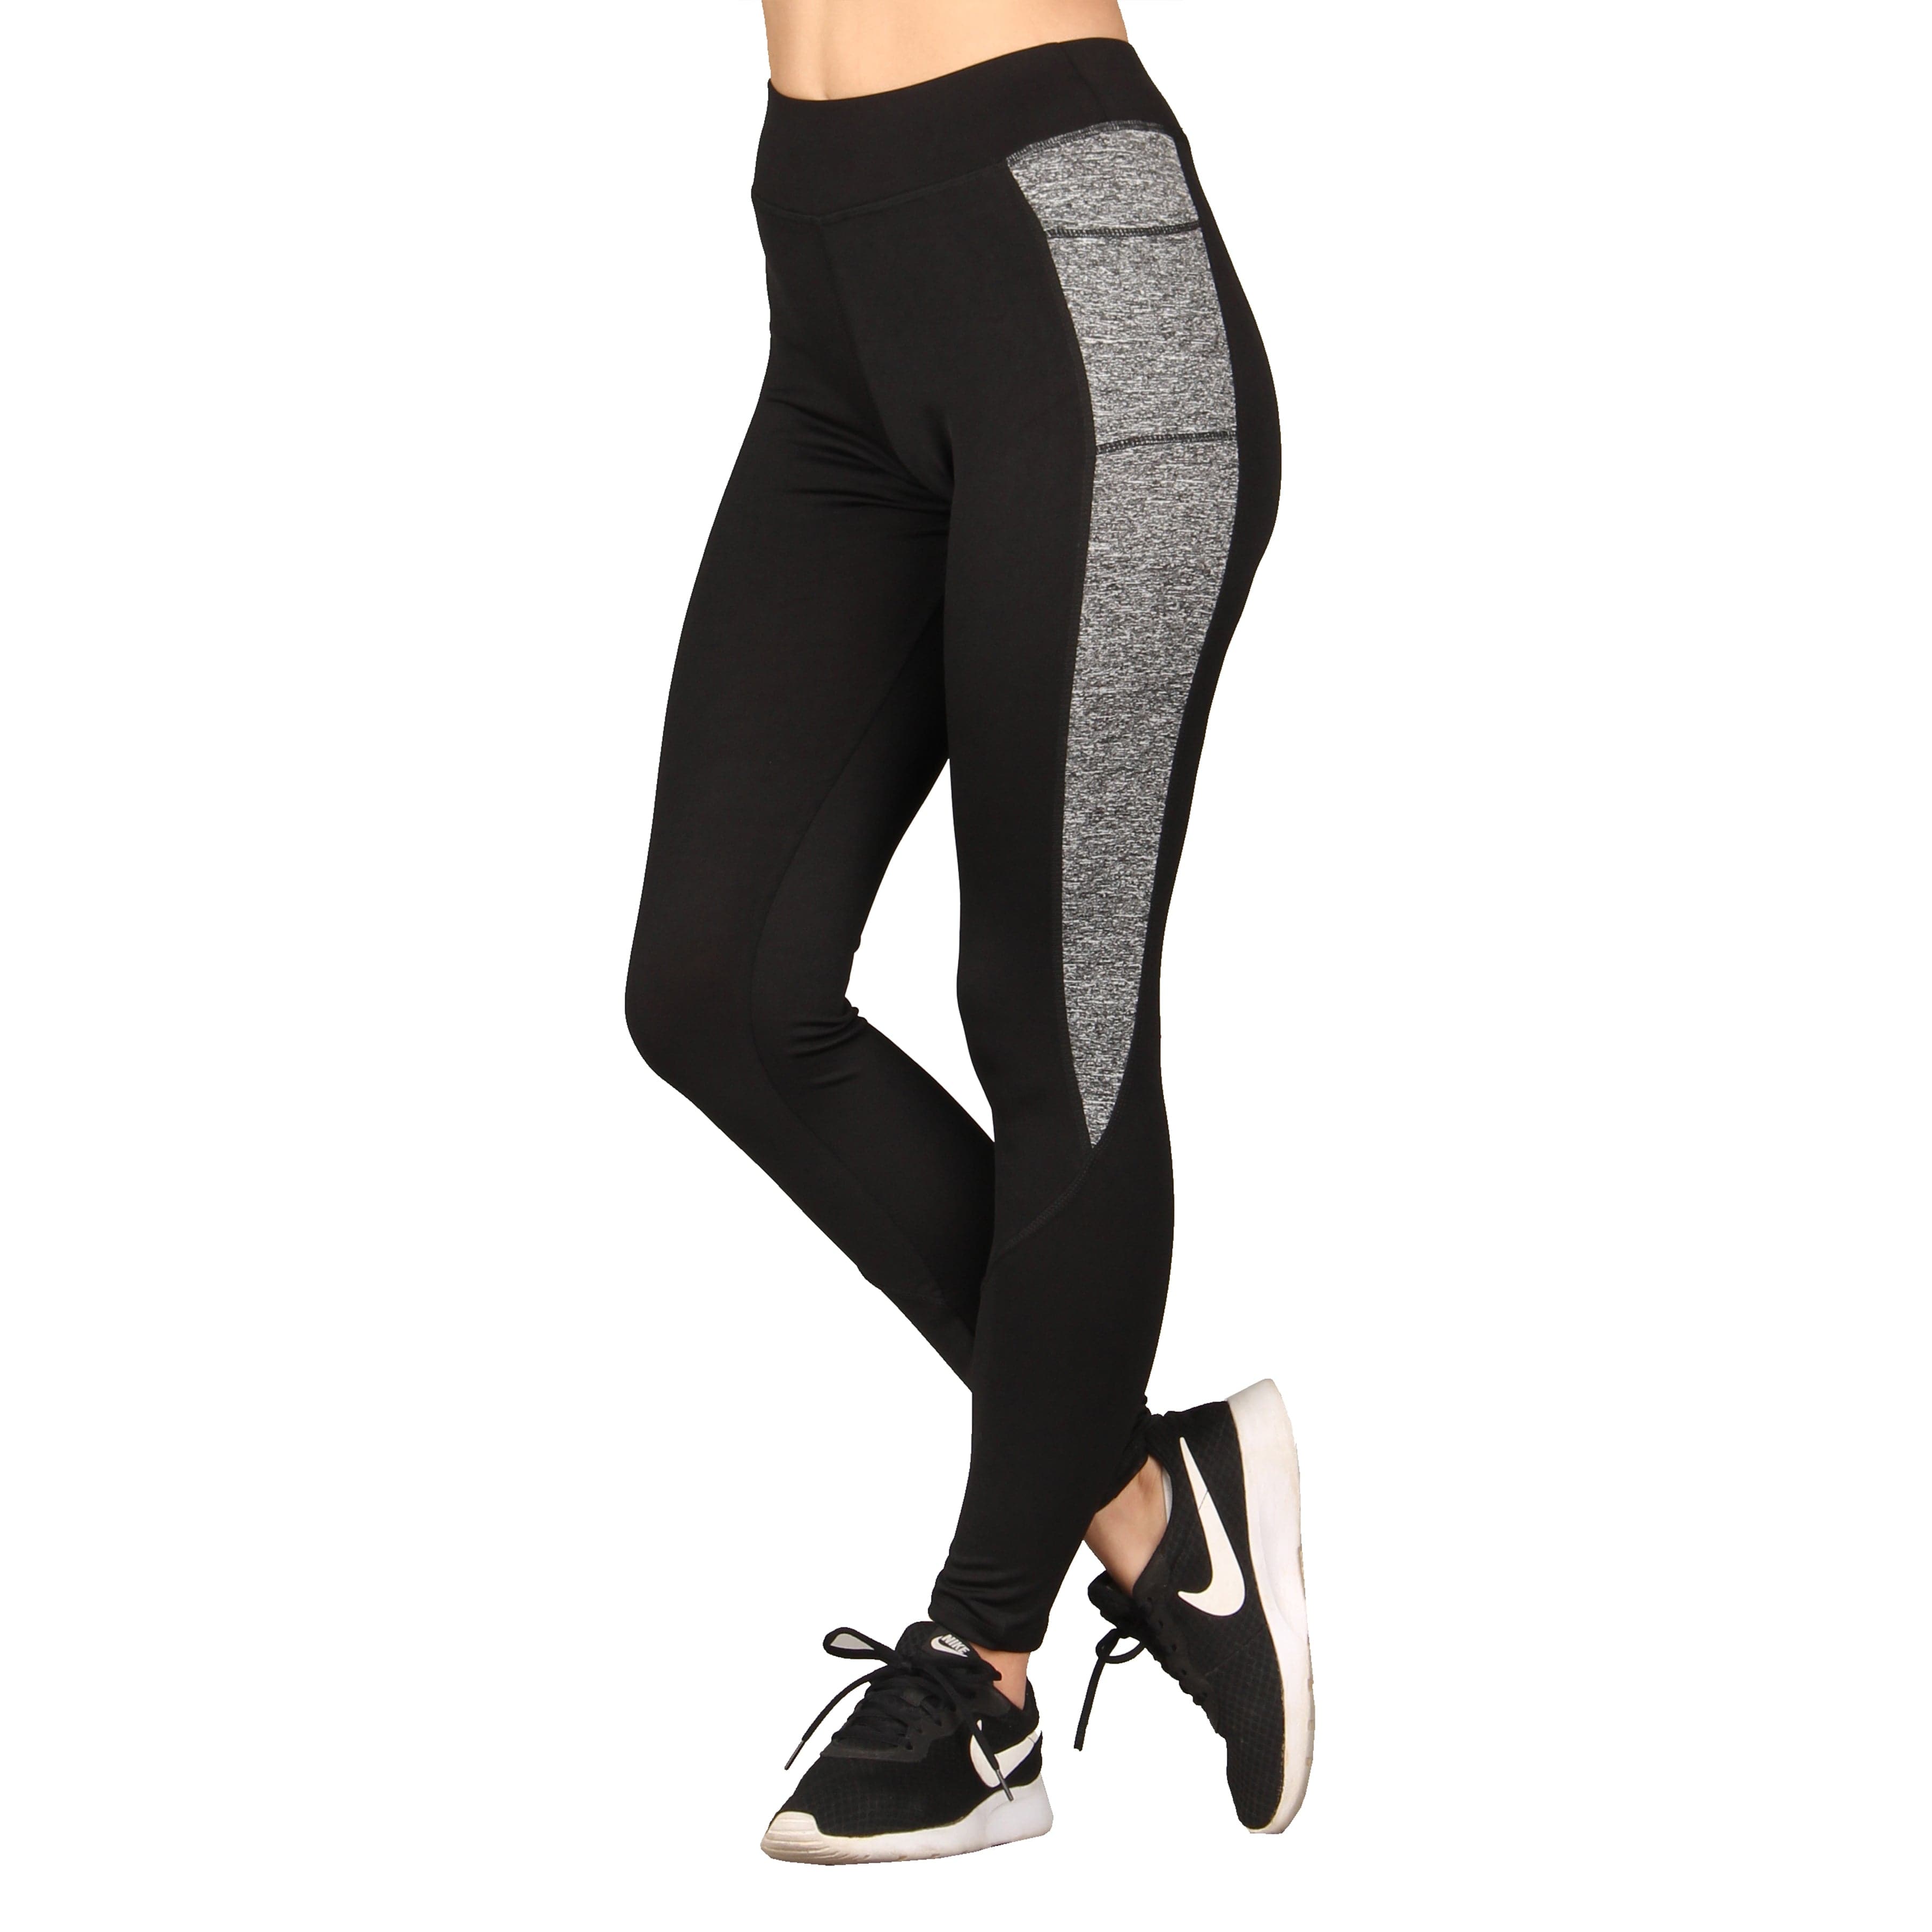 High Waisted Compression Running Leggings With Pockets For Women Perfect  For Yoga, Running, Gym And Fitness Sportswear With 3/4 Sleeves And Pockets  From Vanilla12, $14.83 | DHgate.Com